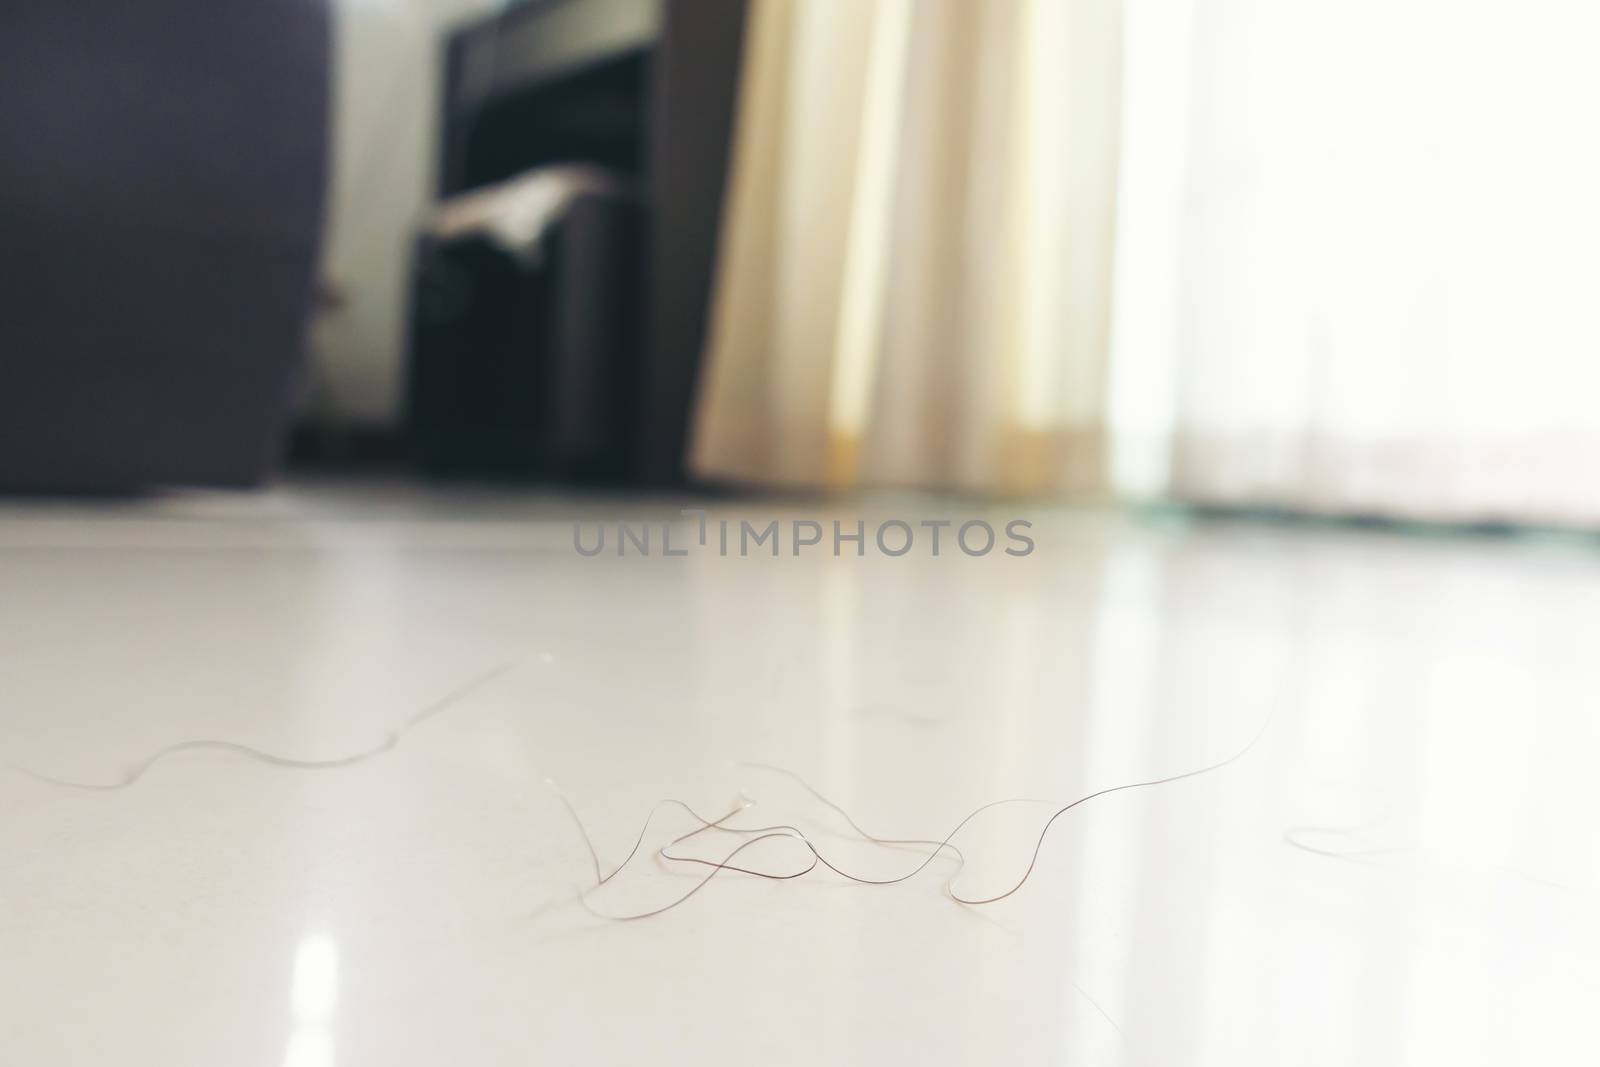 pubic hair fall on bedroom floor by anankkml